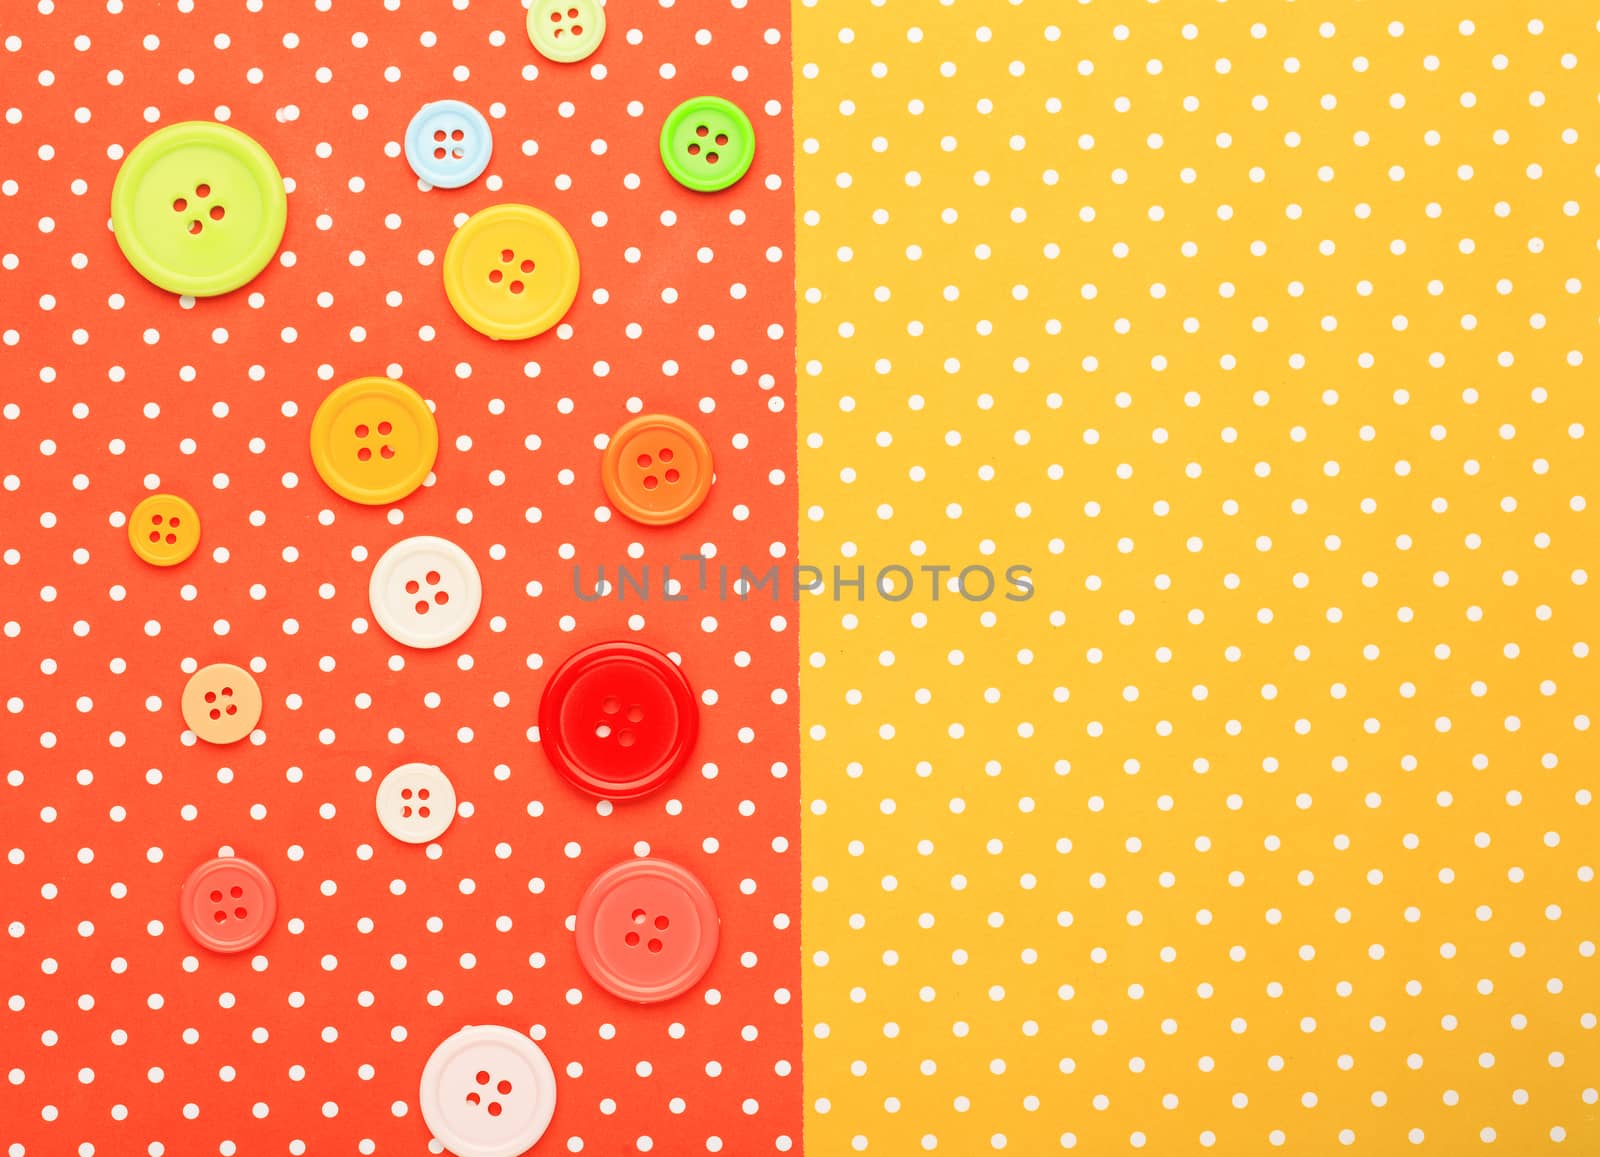 Buttons with colorful topped background